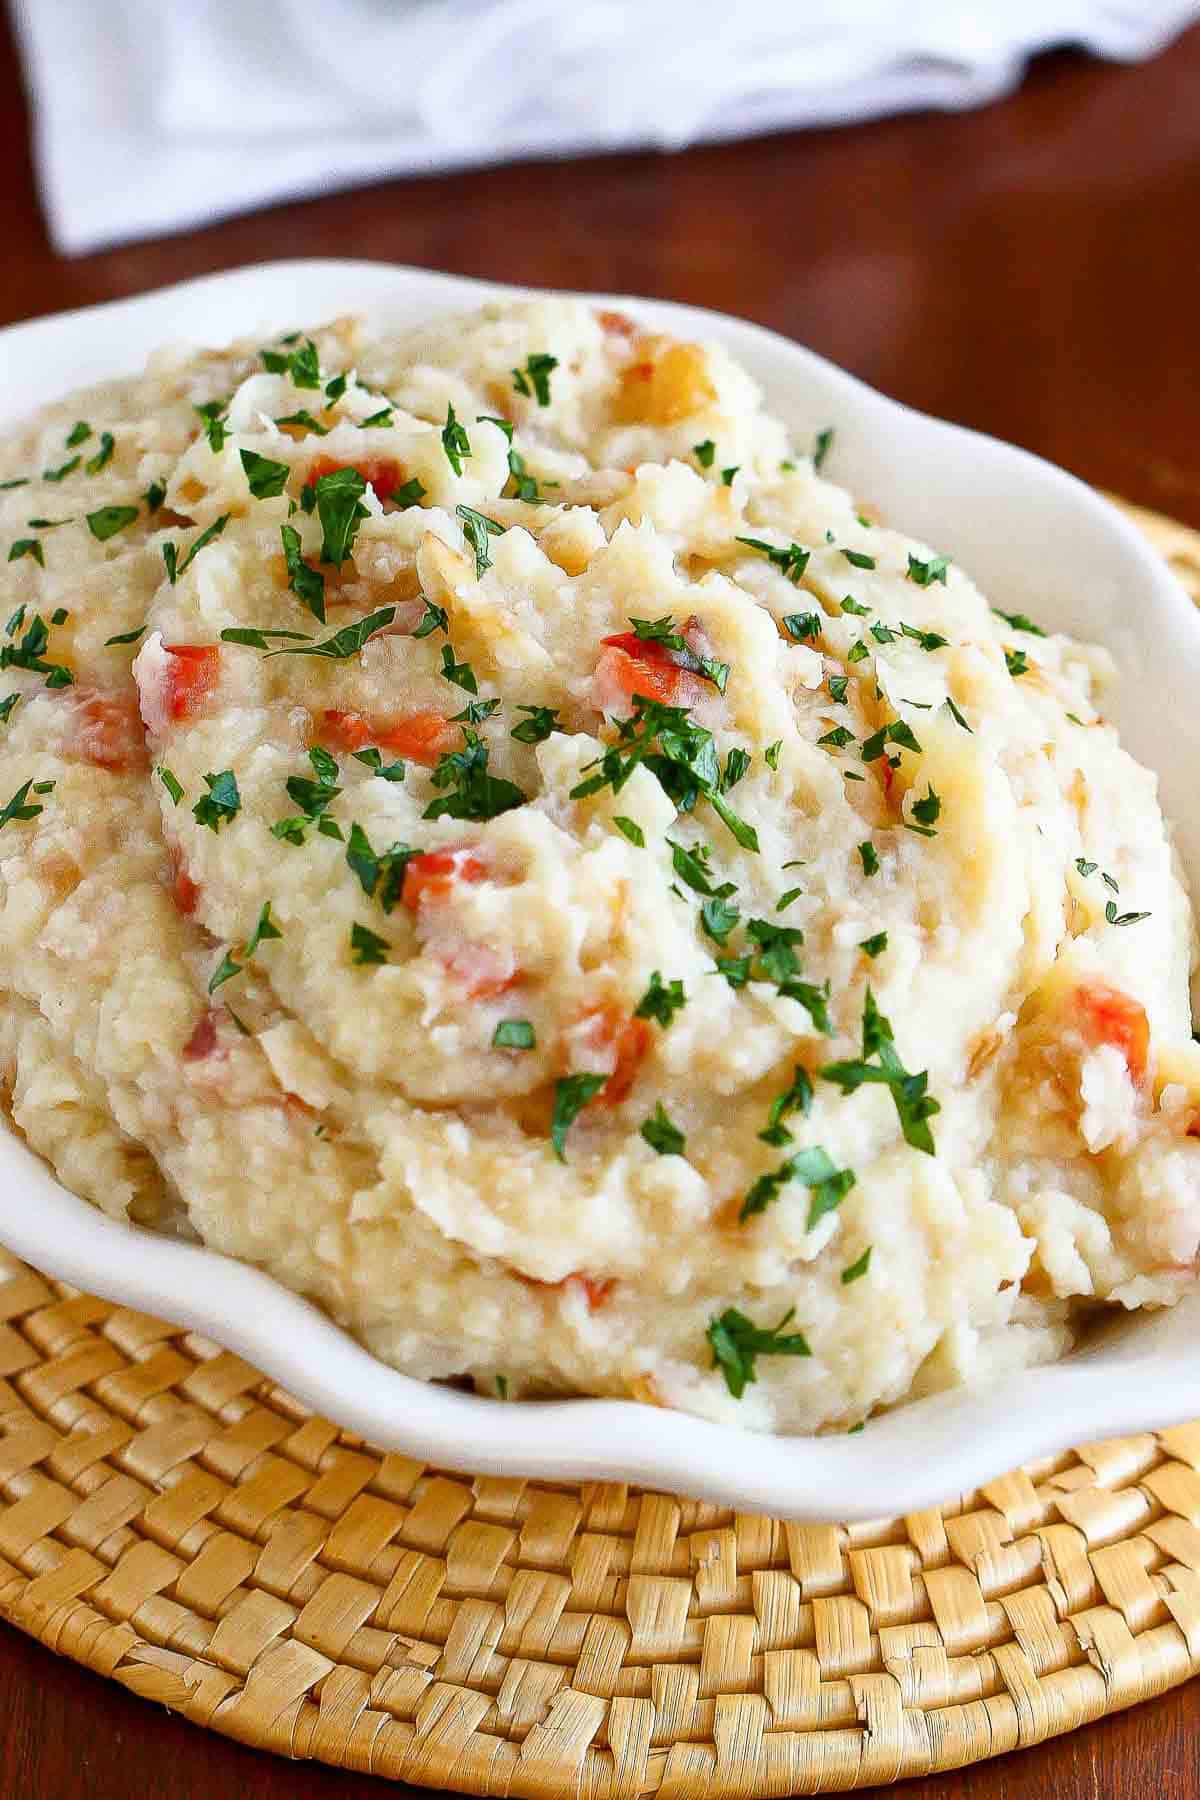 Mashed cauliflower and potatoes with peppers and onions in a serving dish.